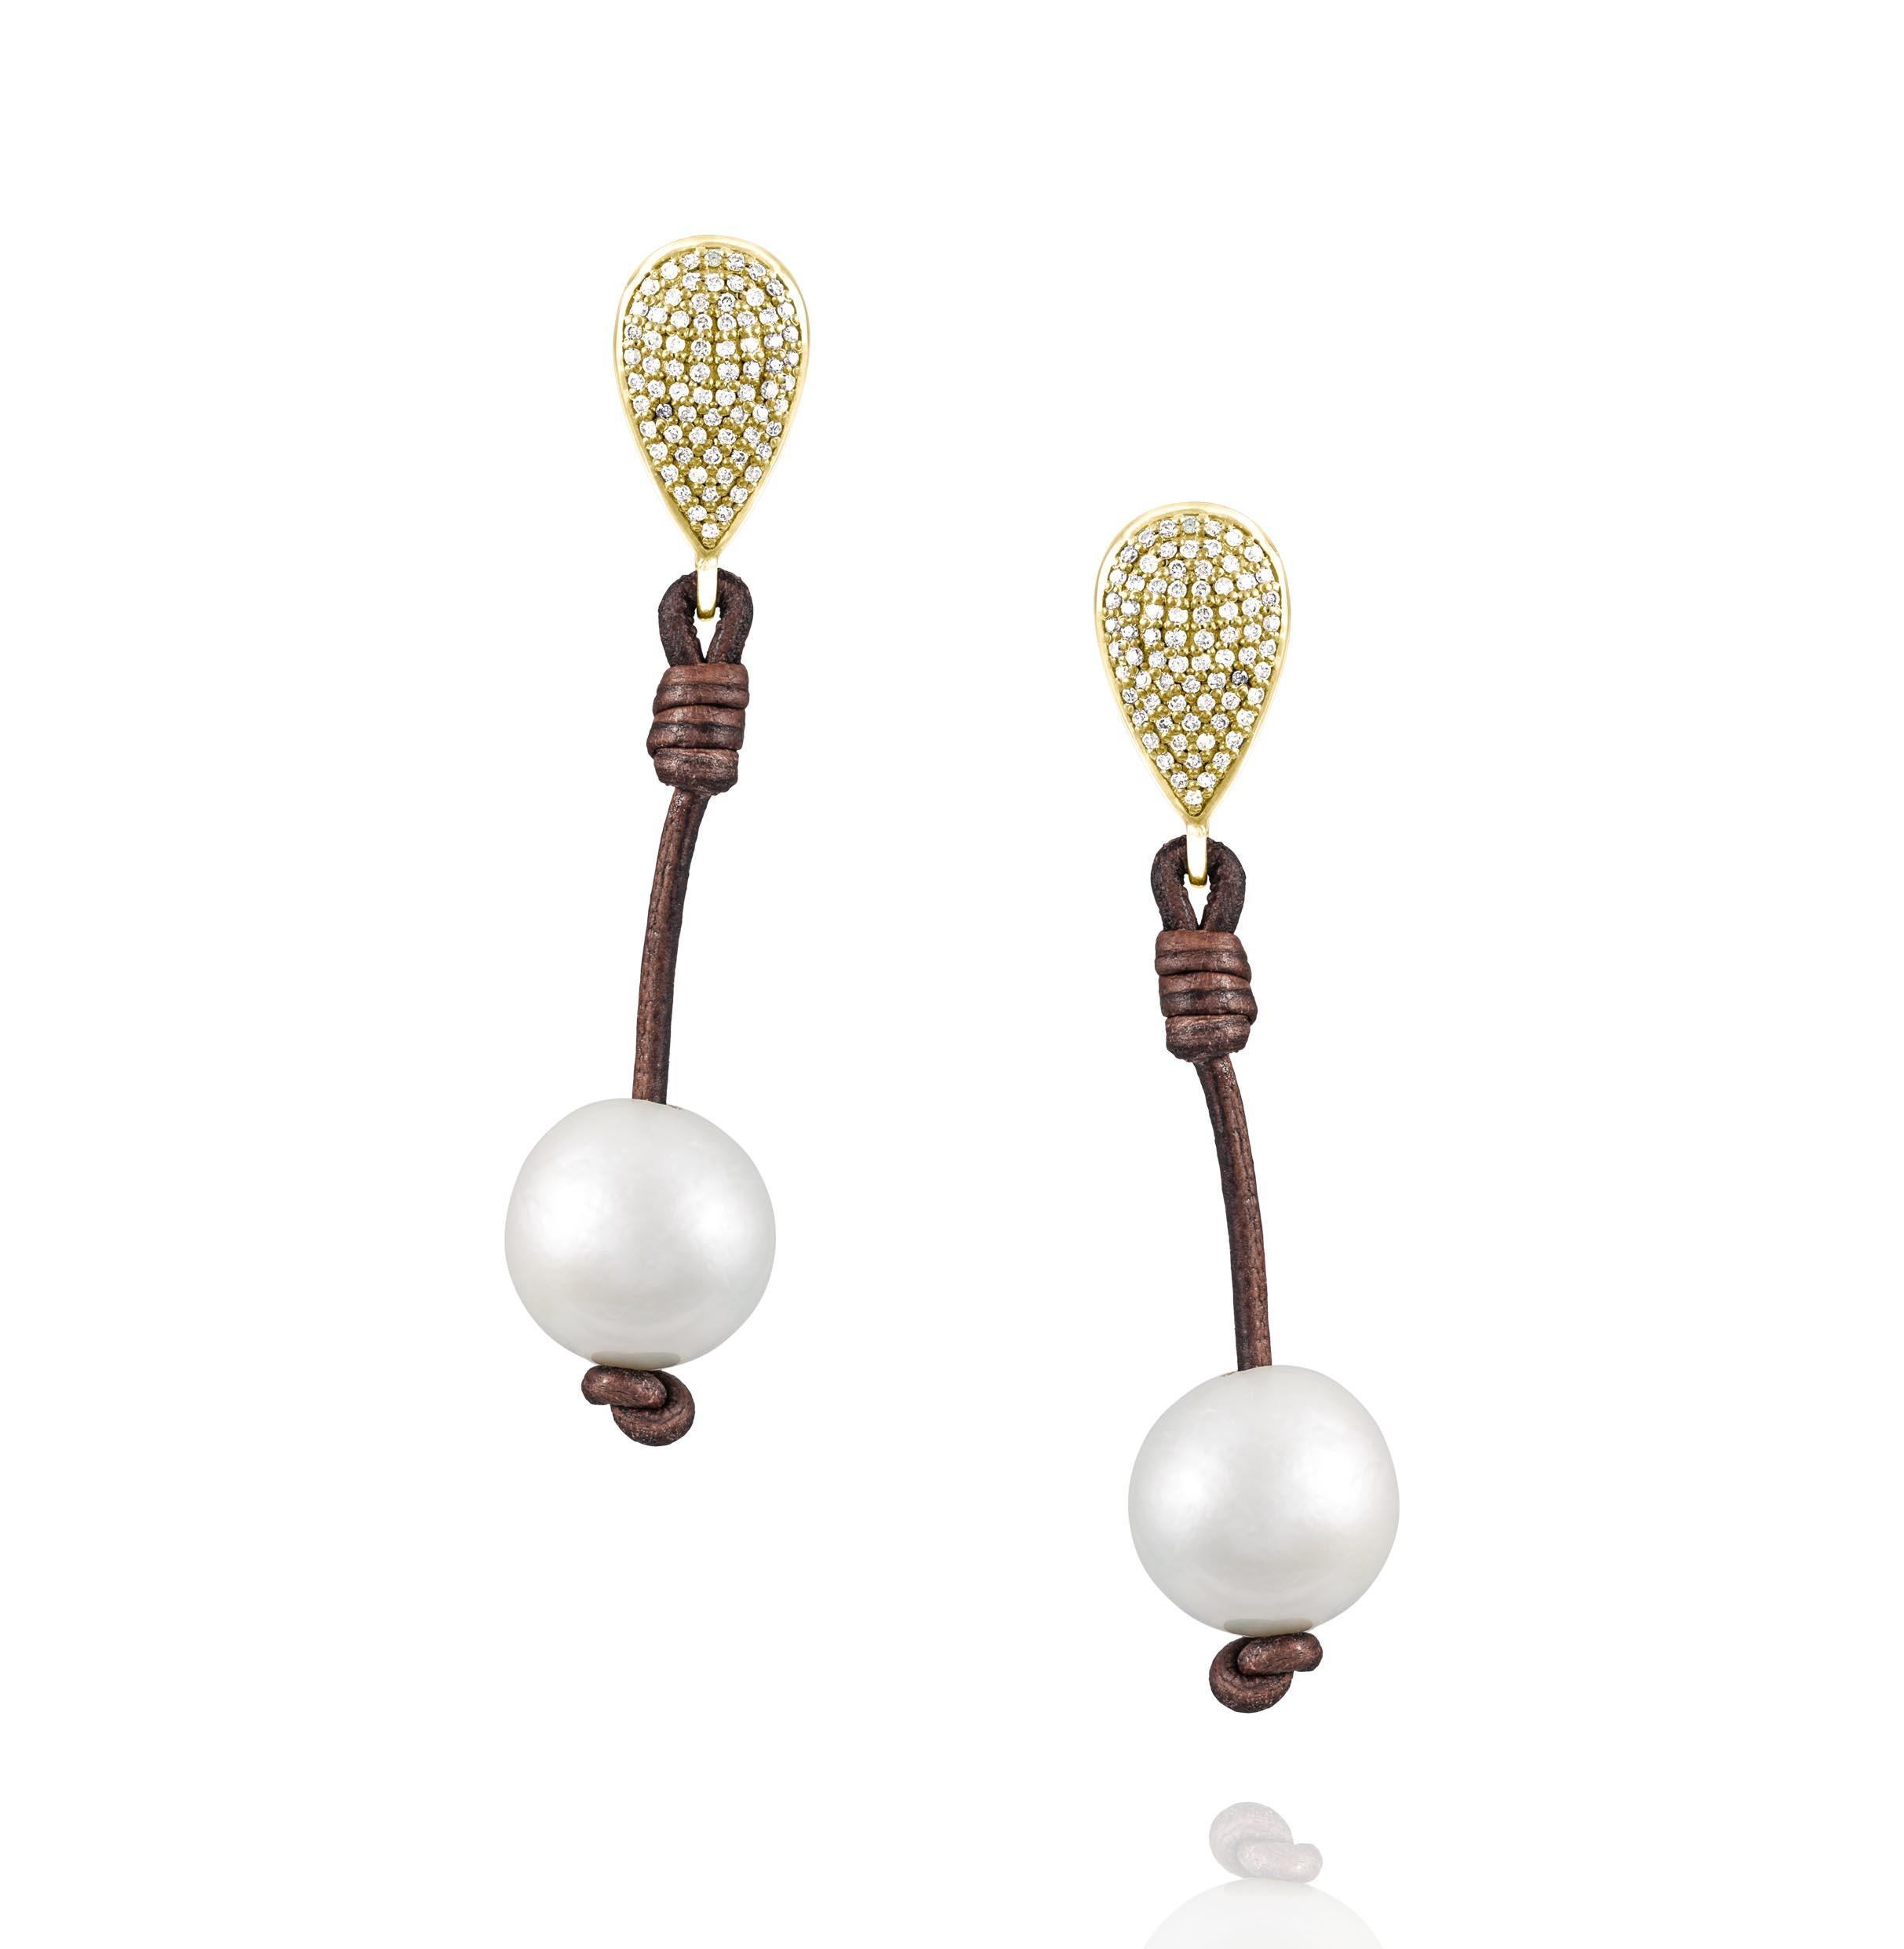 Part of the signature, Vincent Peach Pearl Collection, the Demure Teardrop Earrings feature luxurious,  13mm Tahitian Pearls on Premium Leather Cords with 3.28ct Diamonds mounted in a 14kt Yellow Gold post. These earrings have 14k Yellow Gold Backs